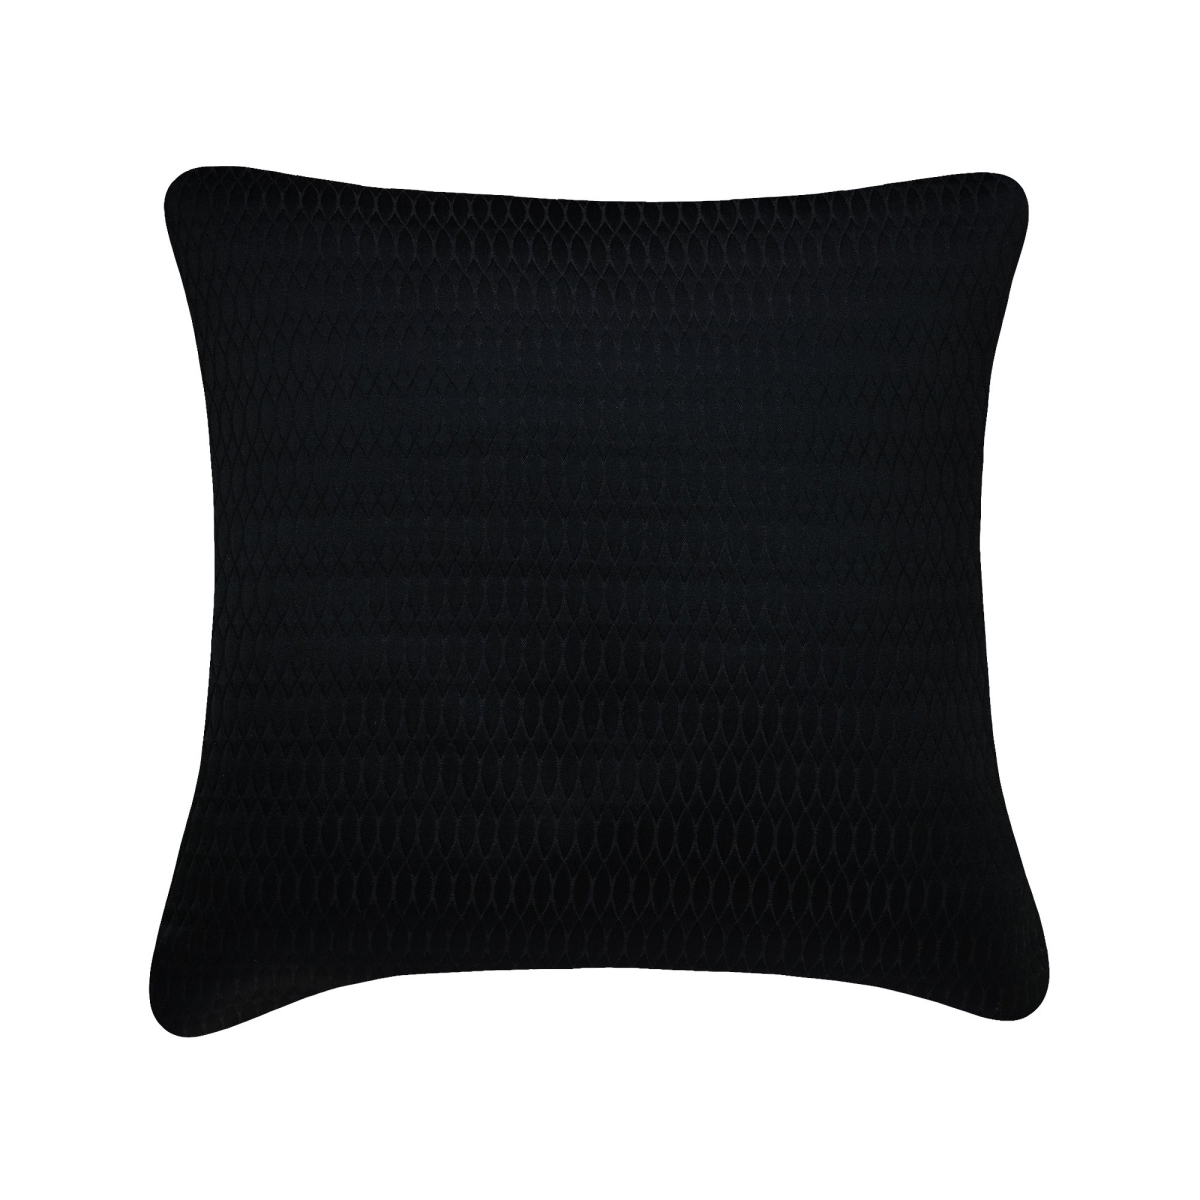 18 X 18 In. Biscay Euro Decorative Cushion, Onyx - 100 Percent Polyester